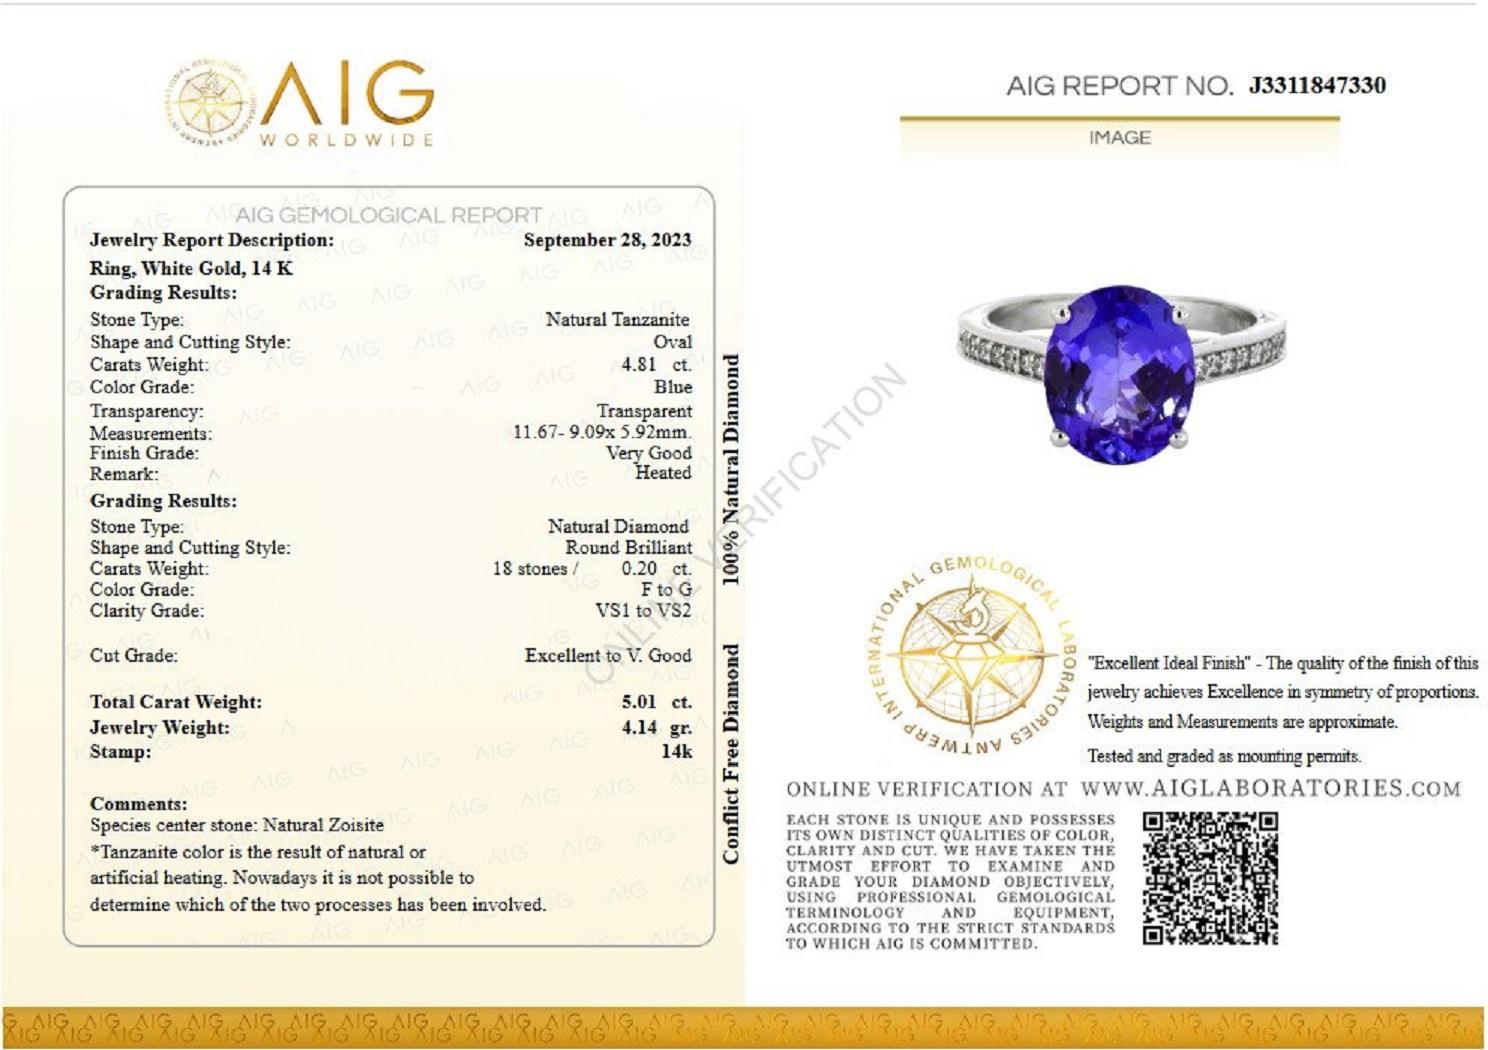 ** In Hong Kong and the USA the VAT is 0%.

Tanzanite is an extremely rare gemstone, found in a single location in the world, at the foothills of mount Kilimanjaro in Tanzania. As this single source is expected to drain out in 20 years from now,